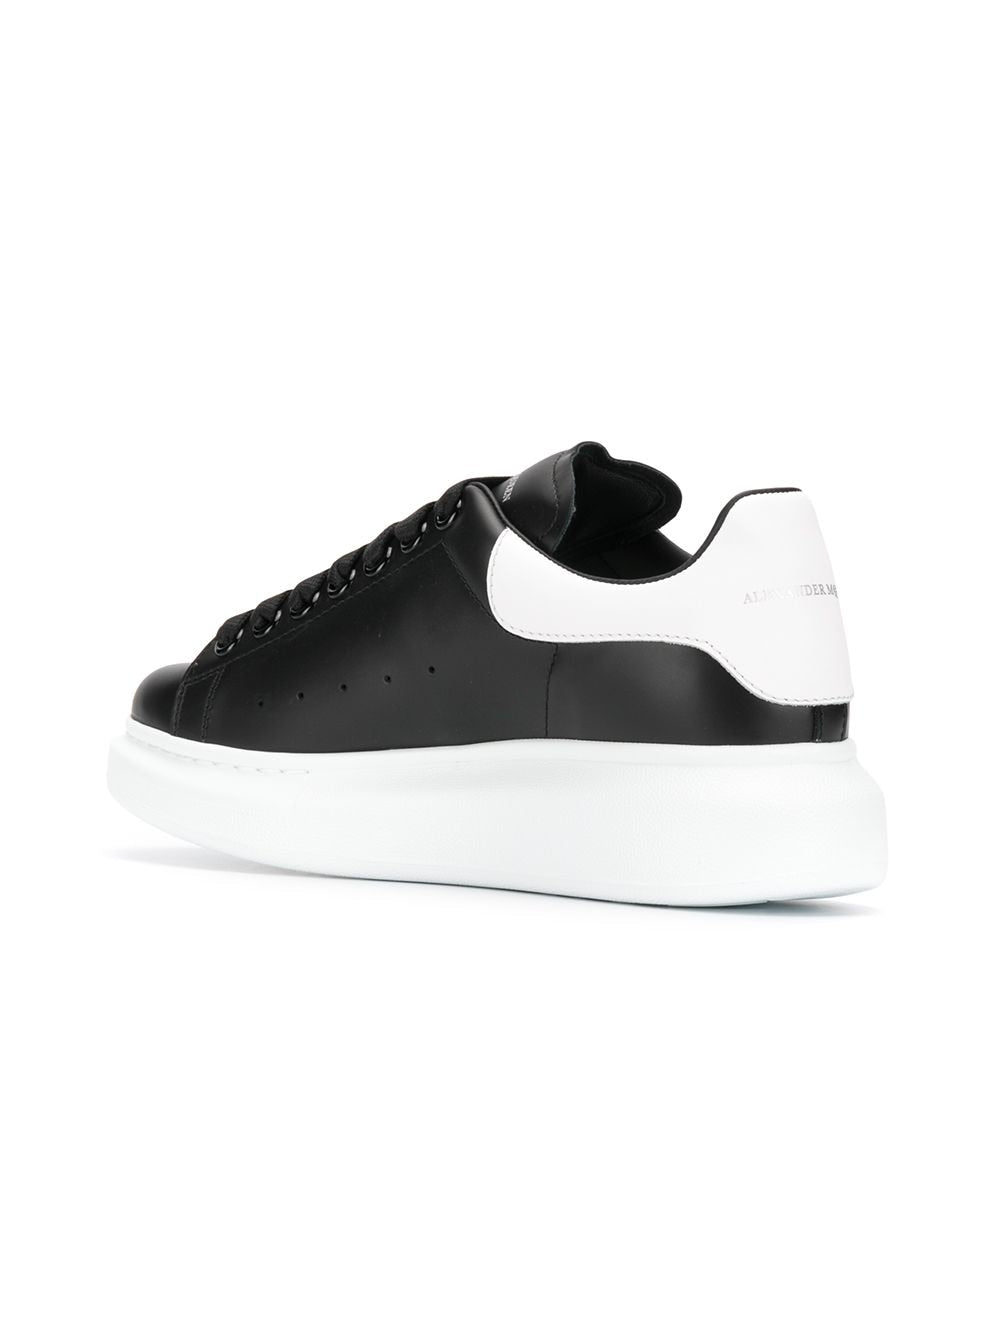 Black/white leather/suede oversized low-top sneakers